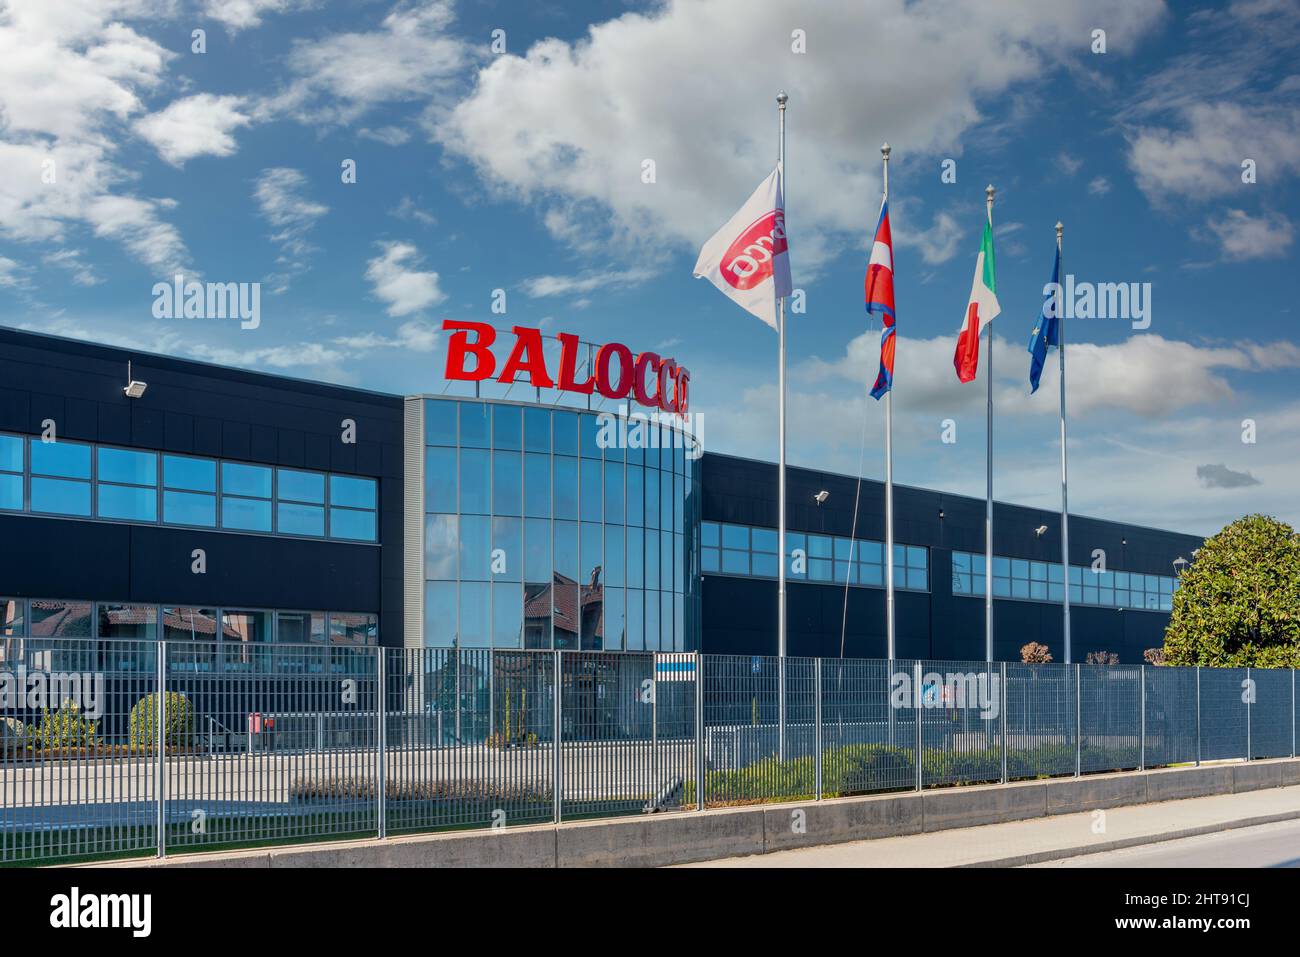 Fossano, Cuneo, Italy - February 27, 2022: Balocco factory building in via Santa Lucia, Balocco is the brand name of the famous confectionery factory Stock Photo